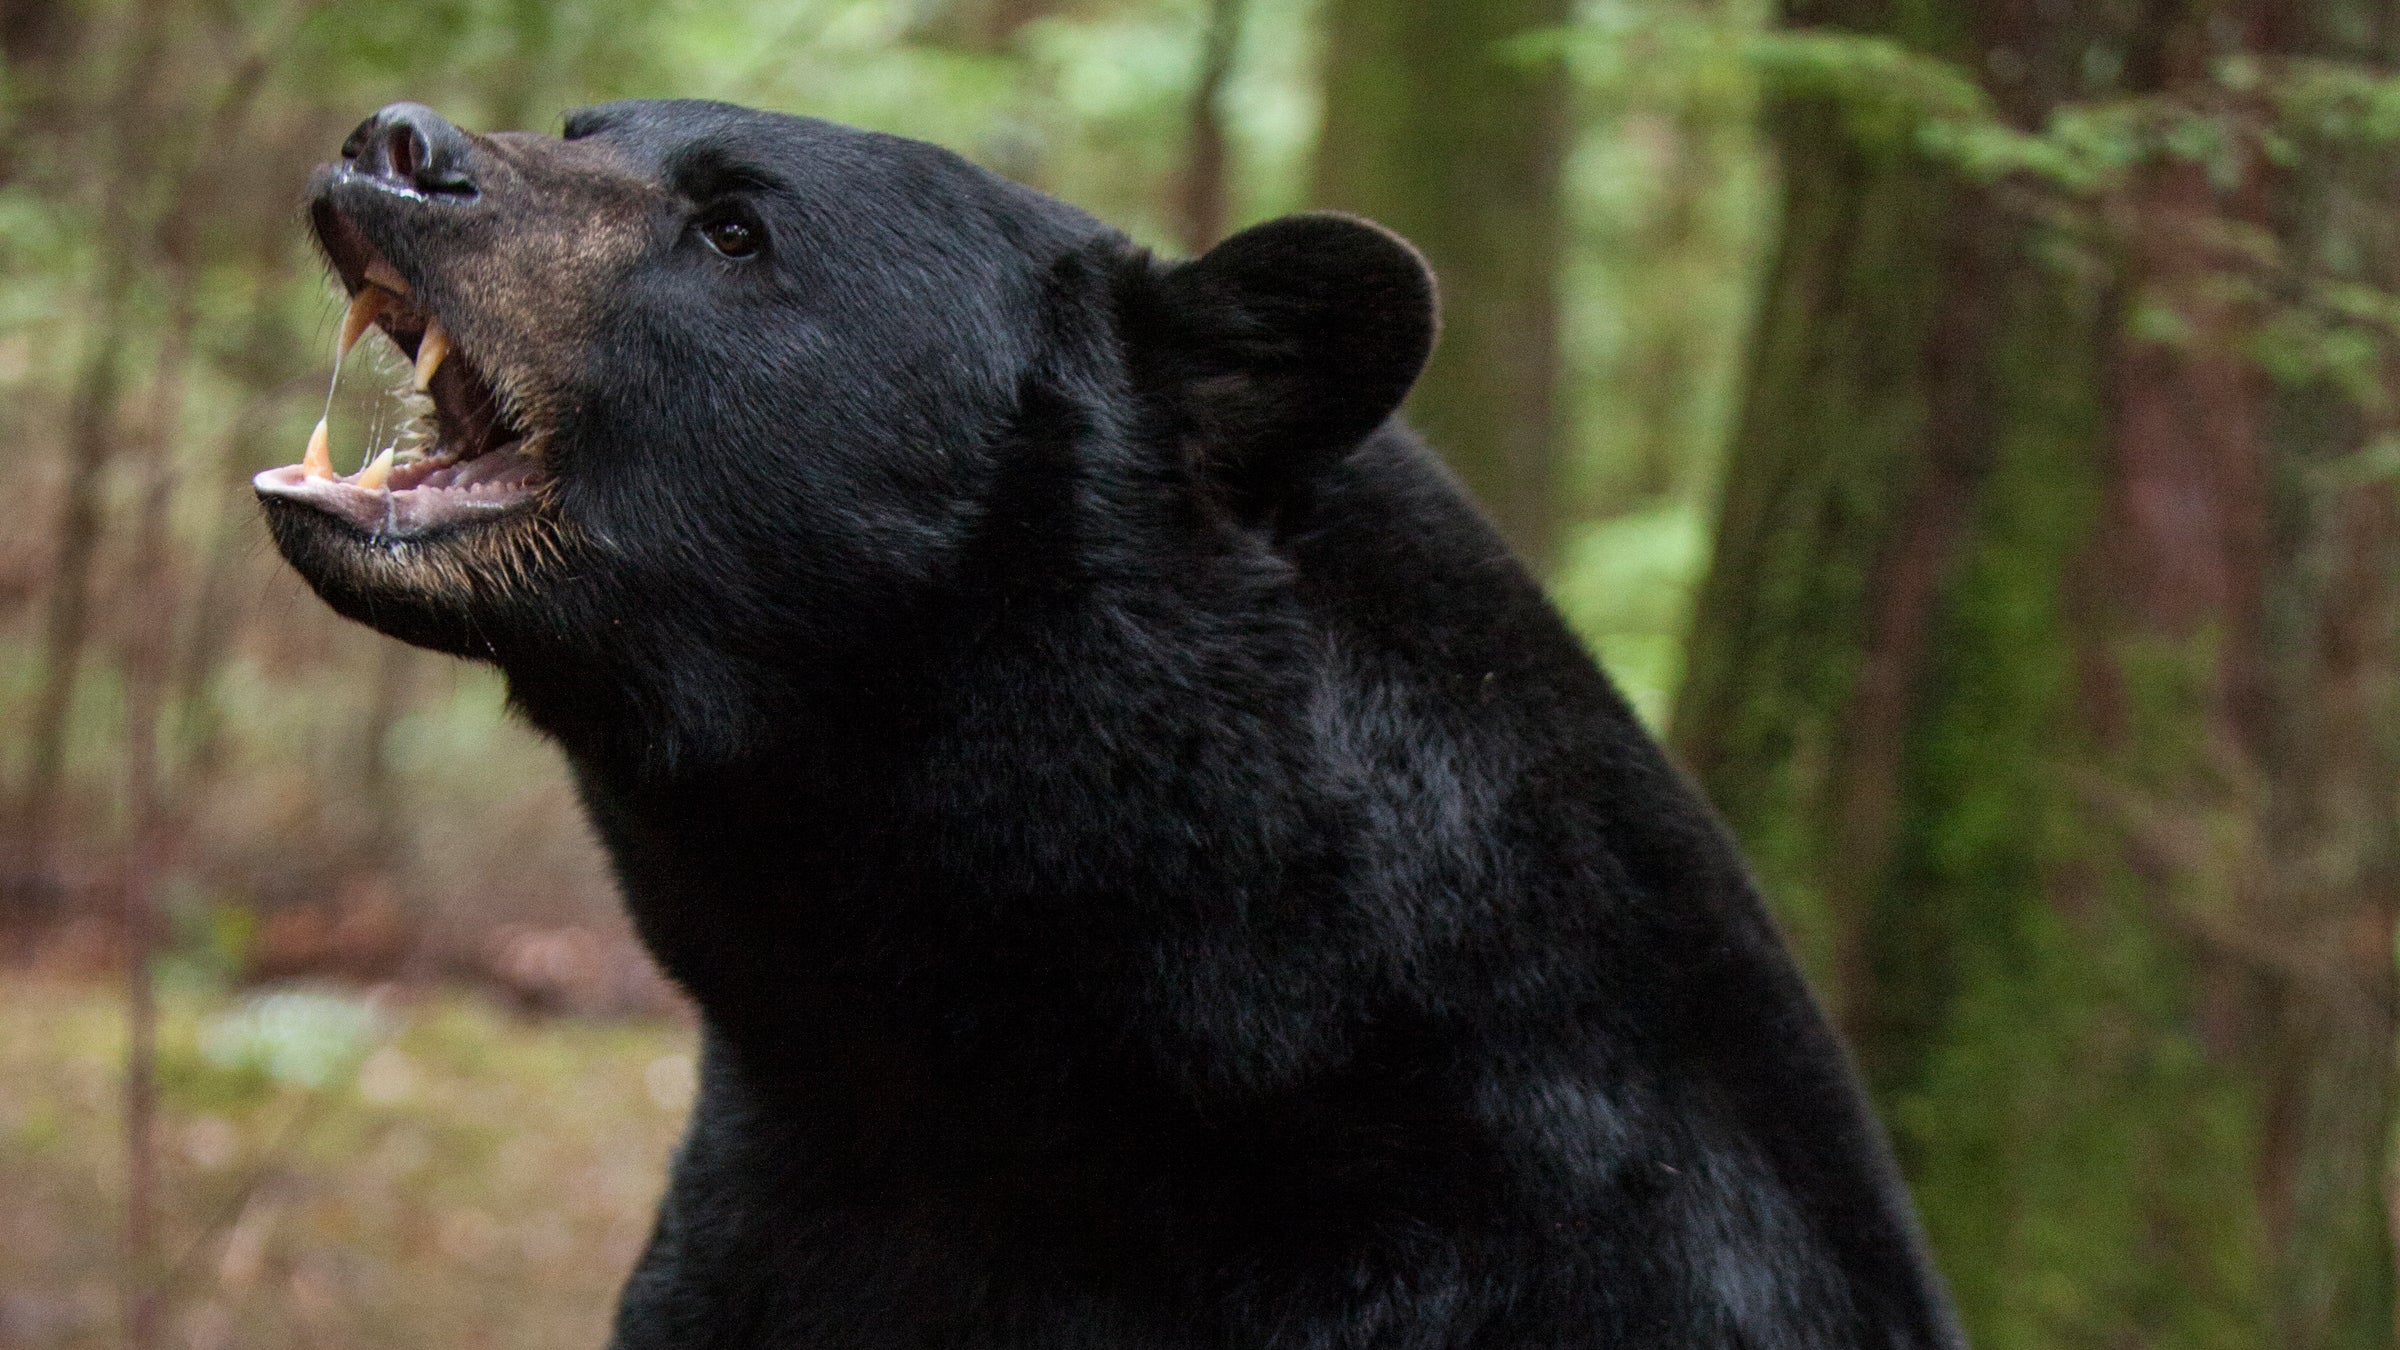 https://cdn.outsideonline.com/wp-content/uploads/migrated-images_parent/migrated-images_100/black-bear-backcountry-movie_h.jpg